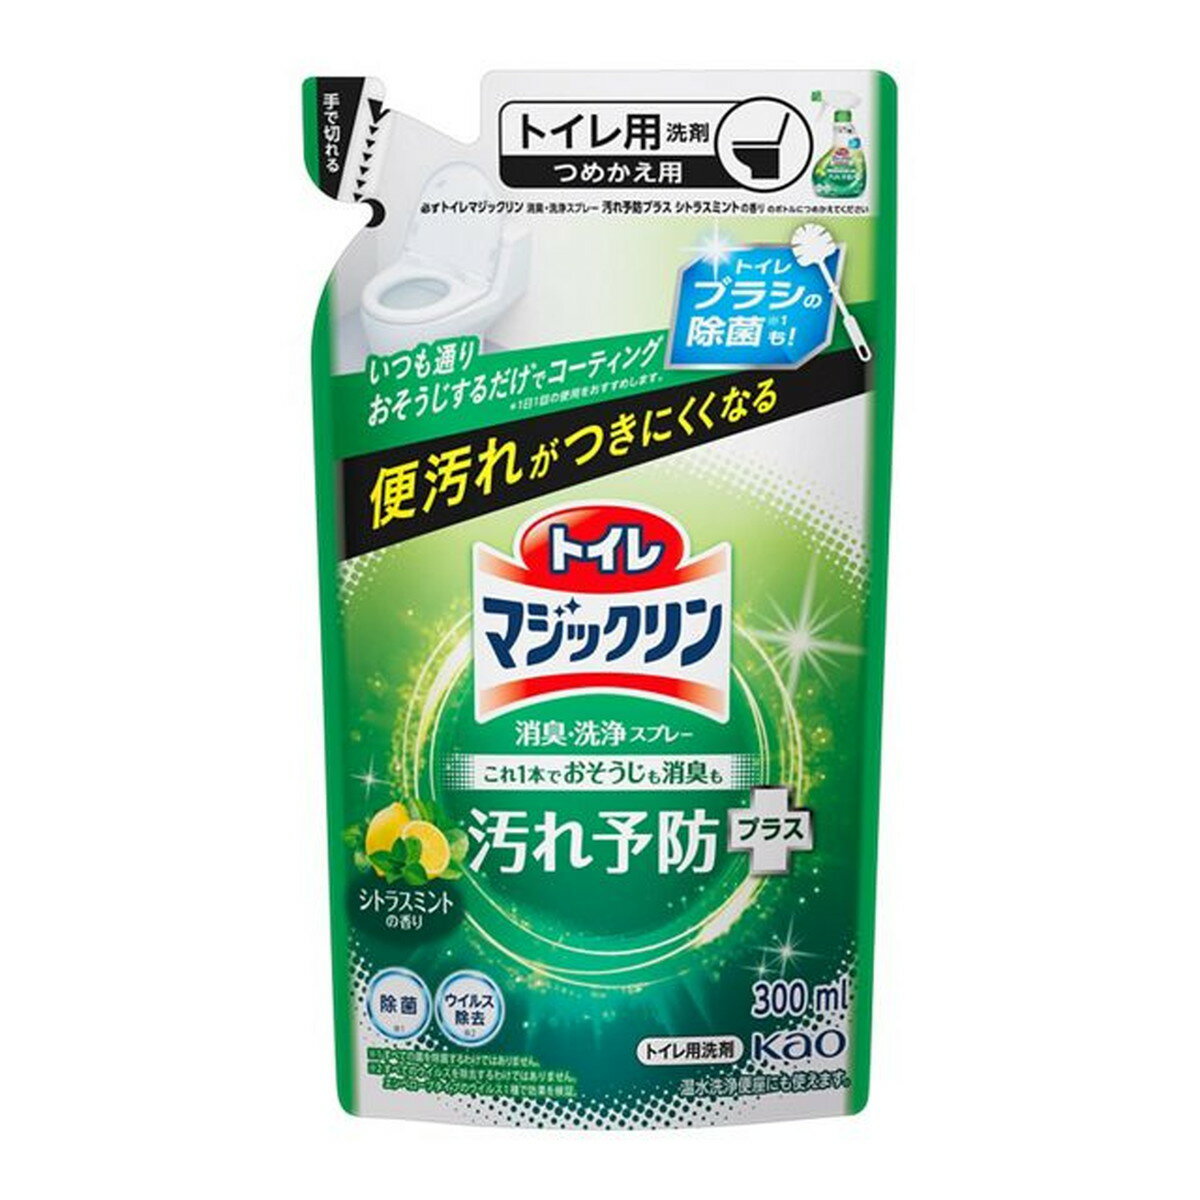 【A商品】 3～5個セット まとめ買い 花王　トイレマジックリン　消臭・洗浄スプレー　シトラスミントの香り　詰め替え　 300ml